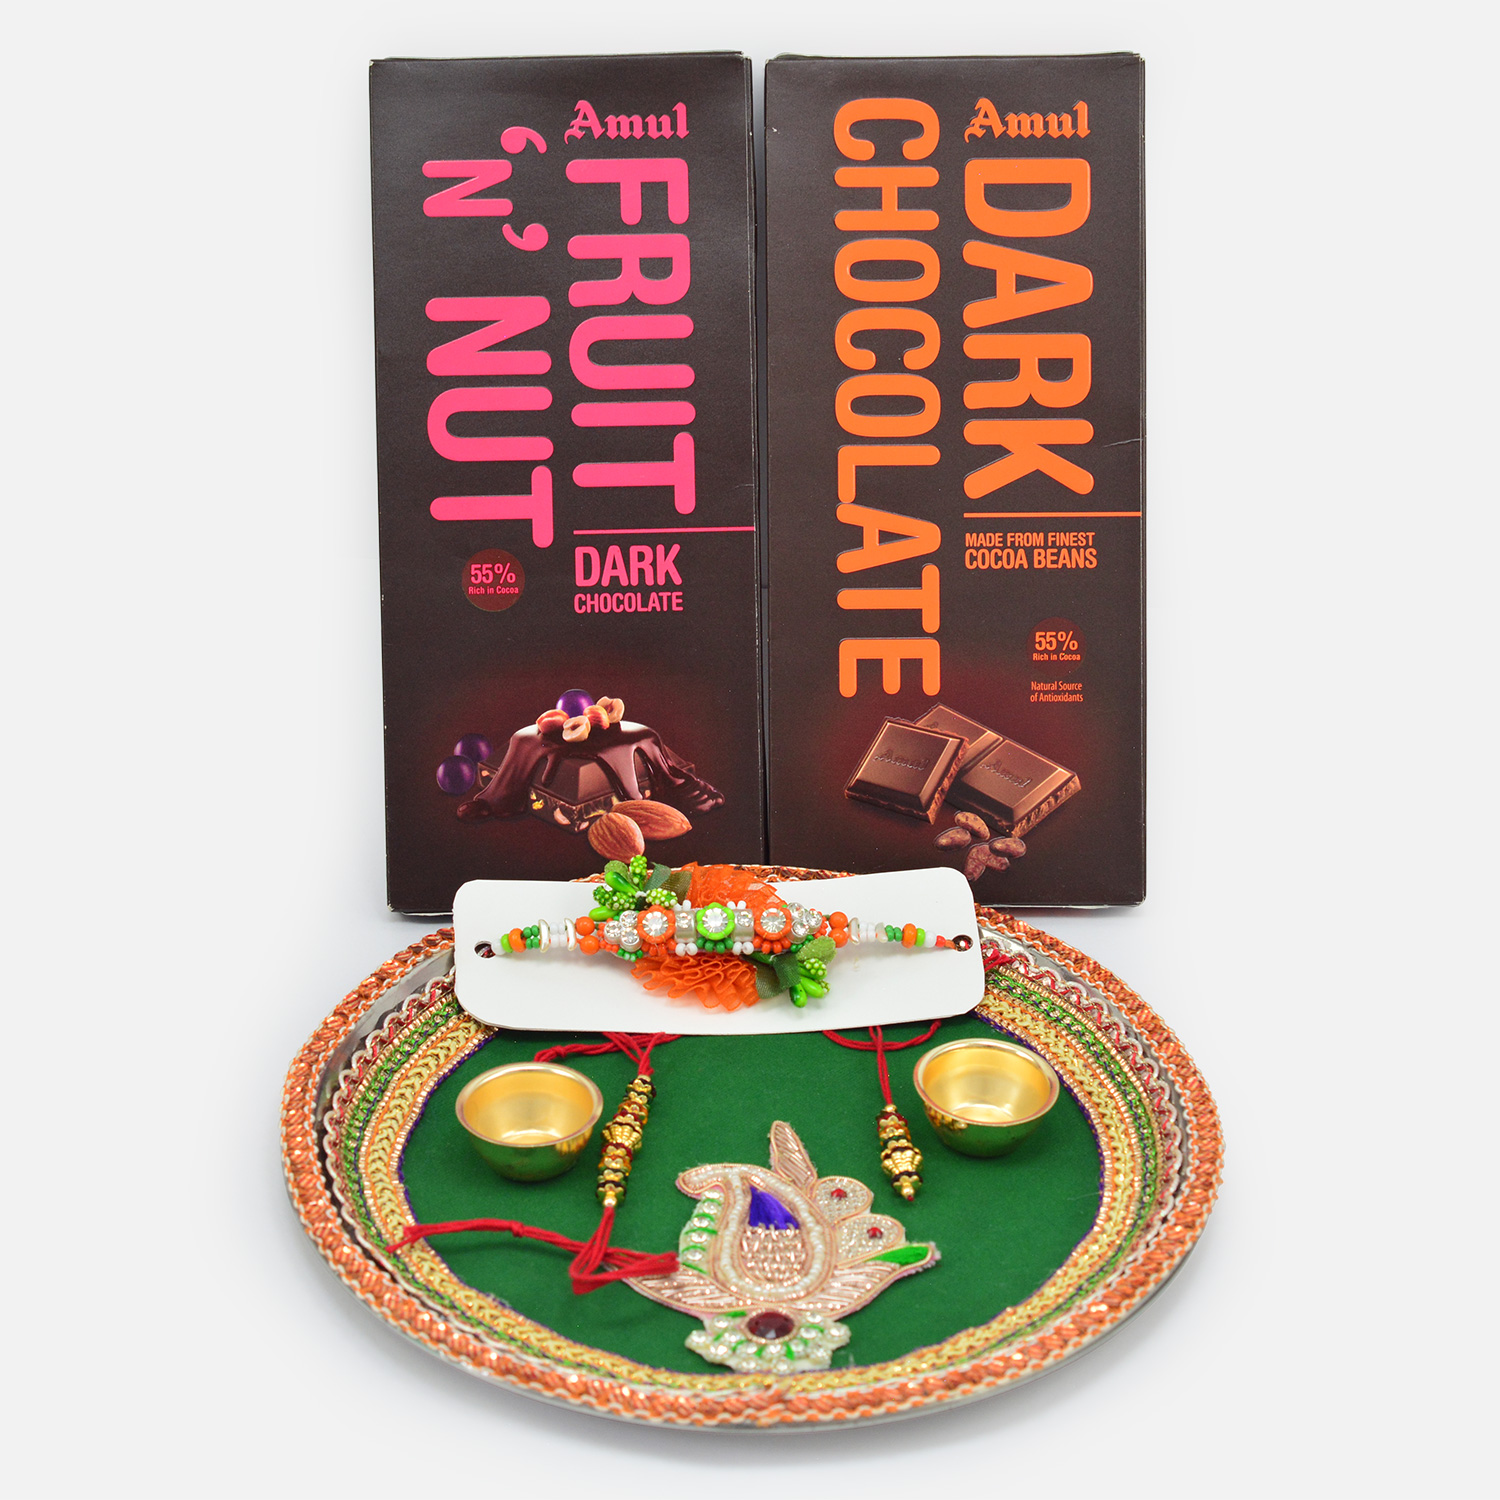 Amul Dark Chocolate and Fruit and Nut Chocolates with Rakhis along with Green Base Puja Thali